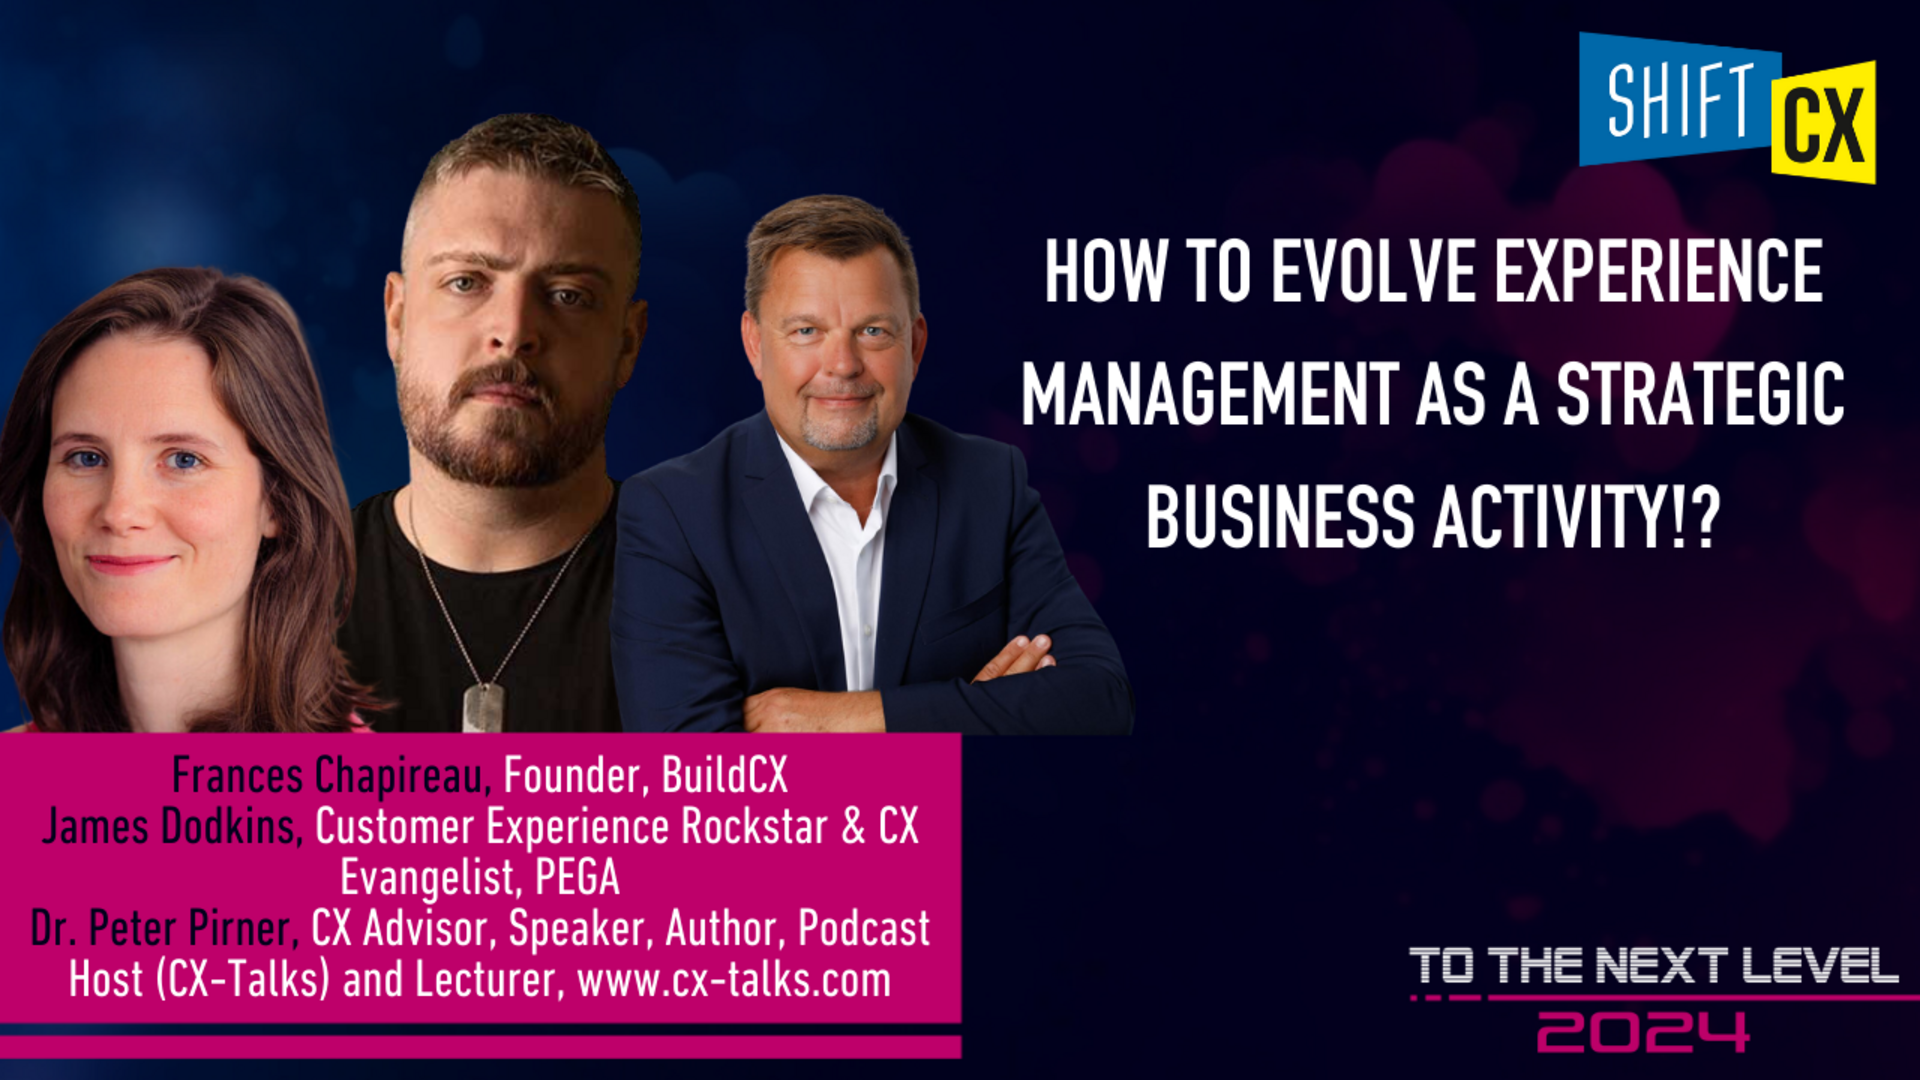 How To Evolve Experience Management As A Strategic Business Activity!?